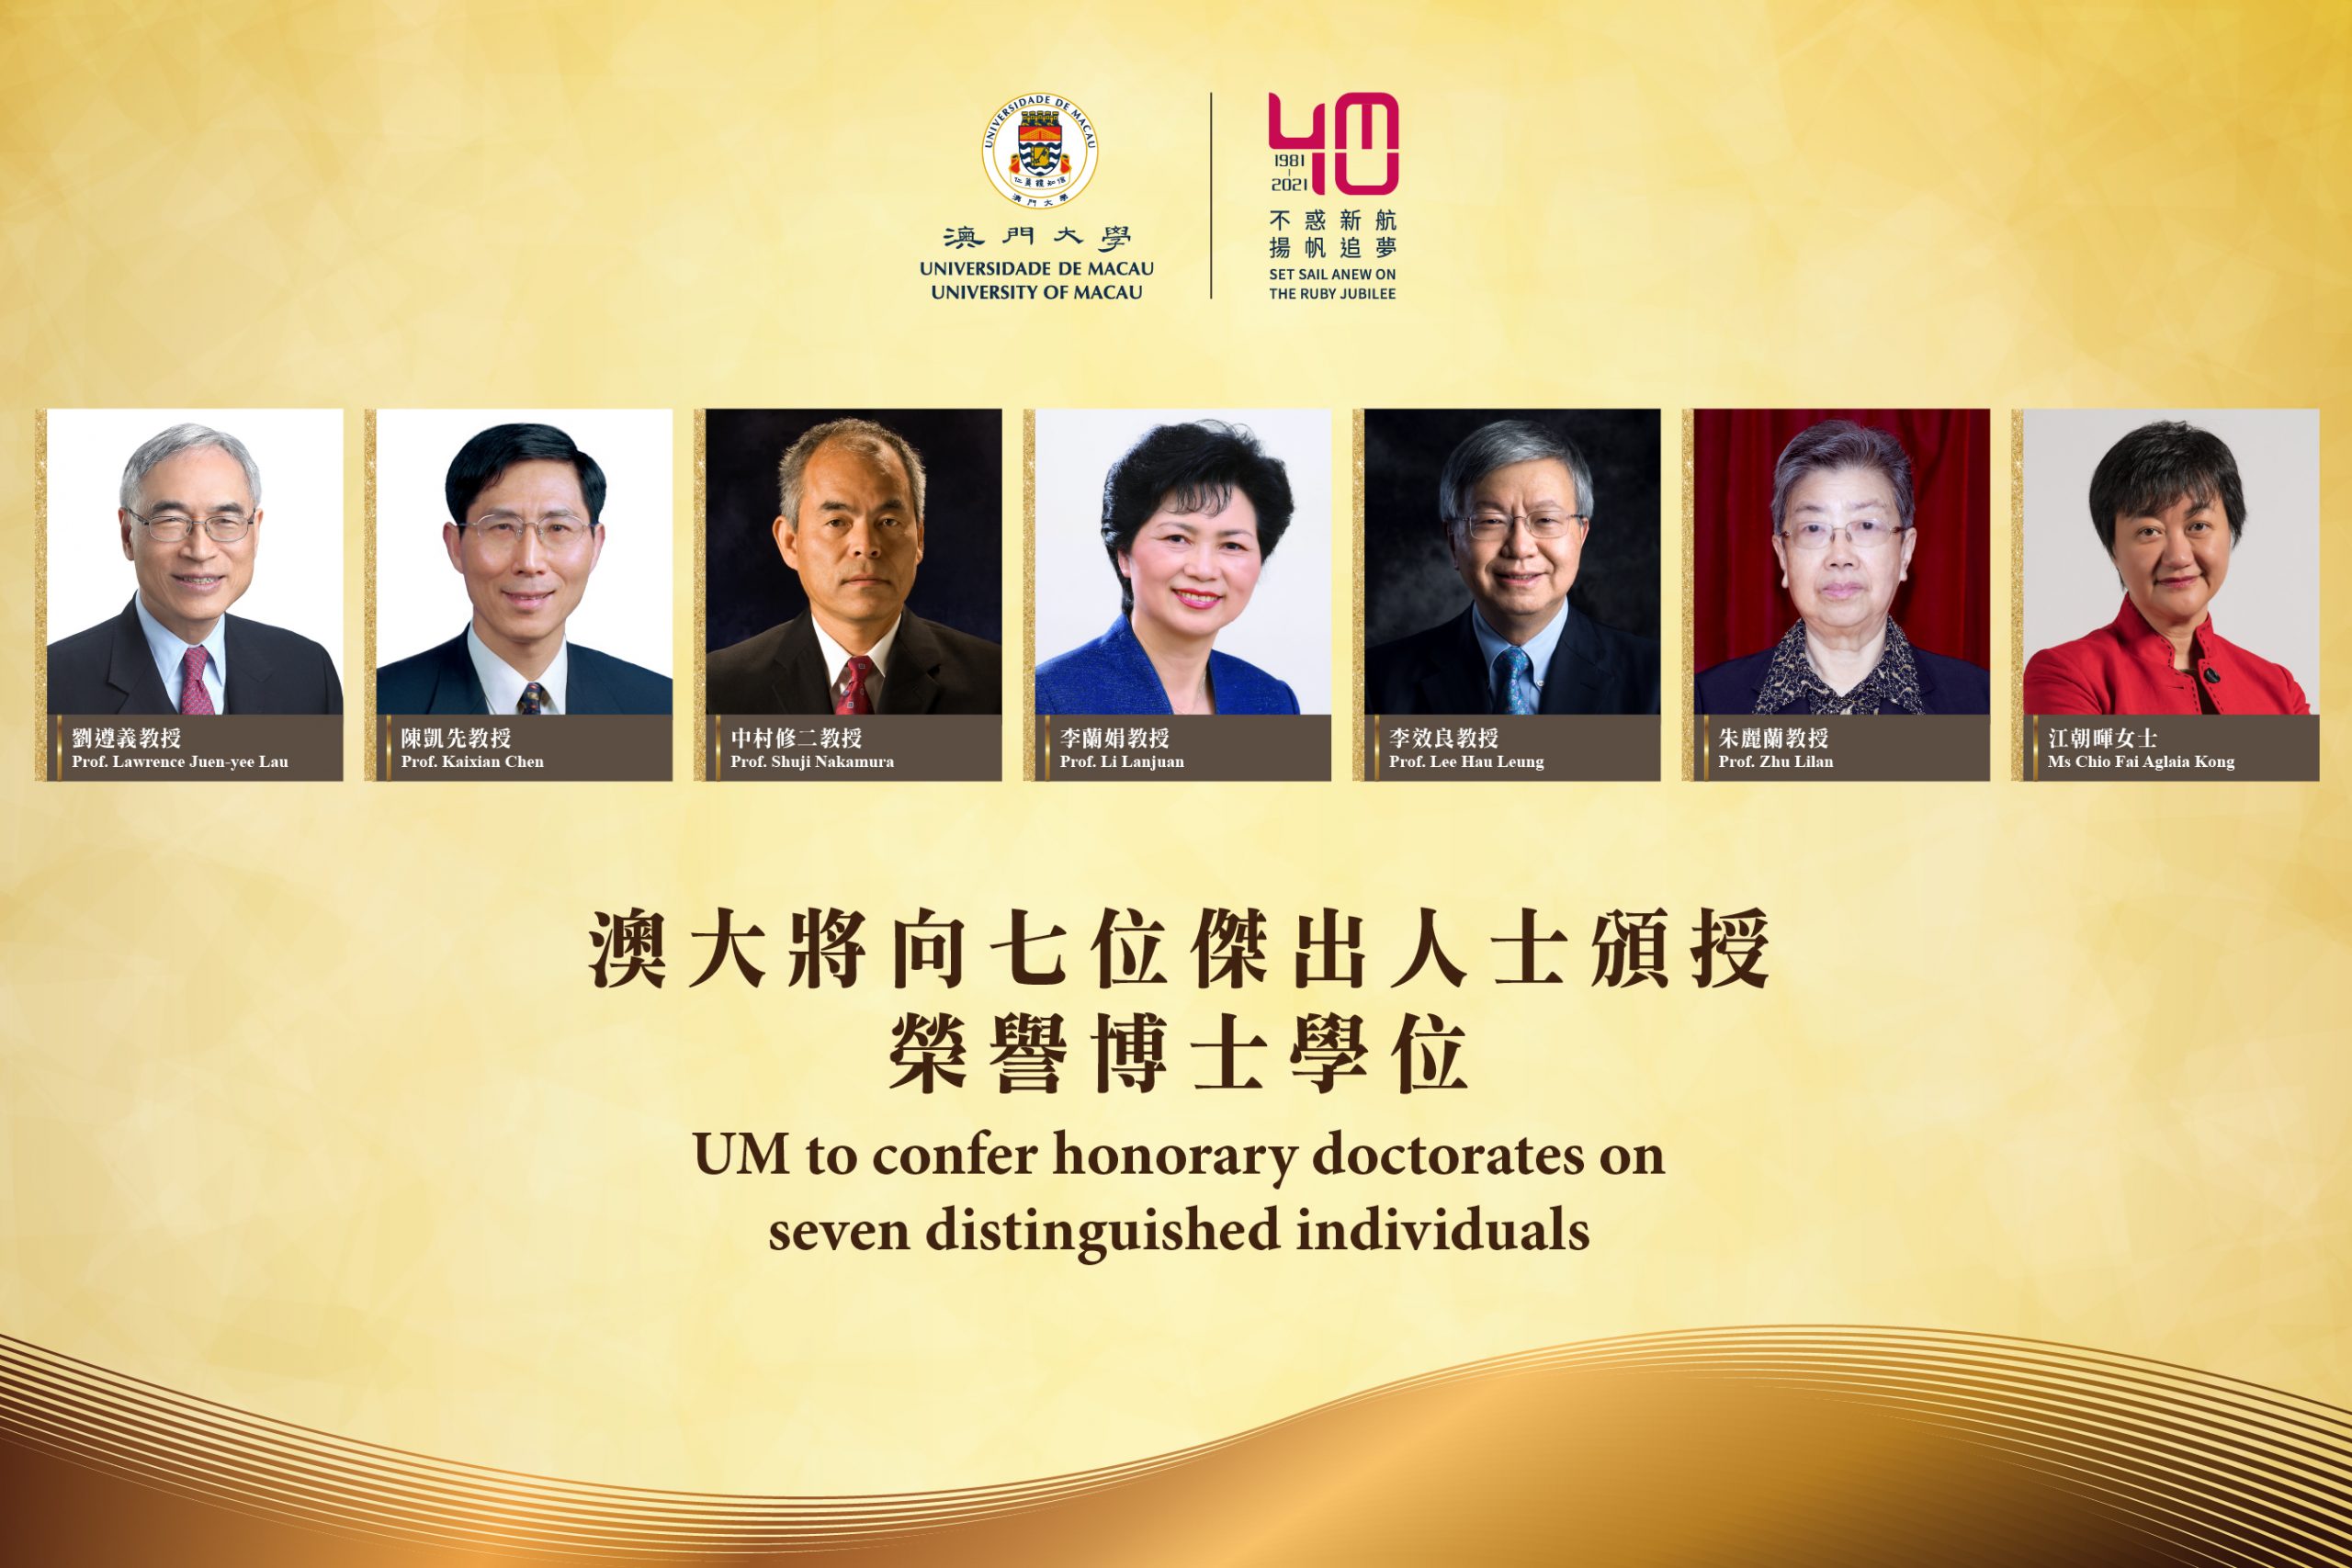 um-to-confer-honorary-doctorates-on-seven-distinguished-individuals-the-world-education-news-wen